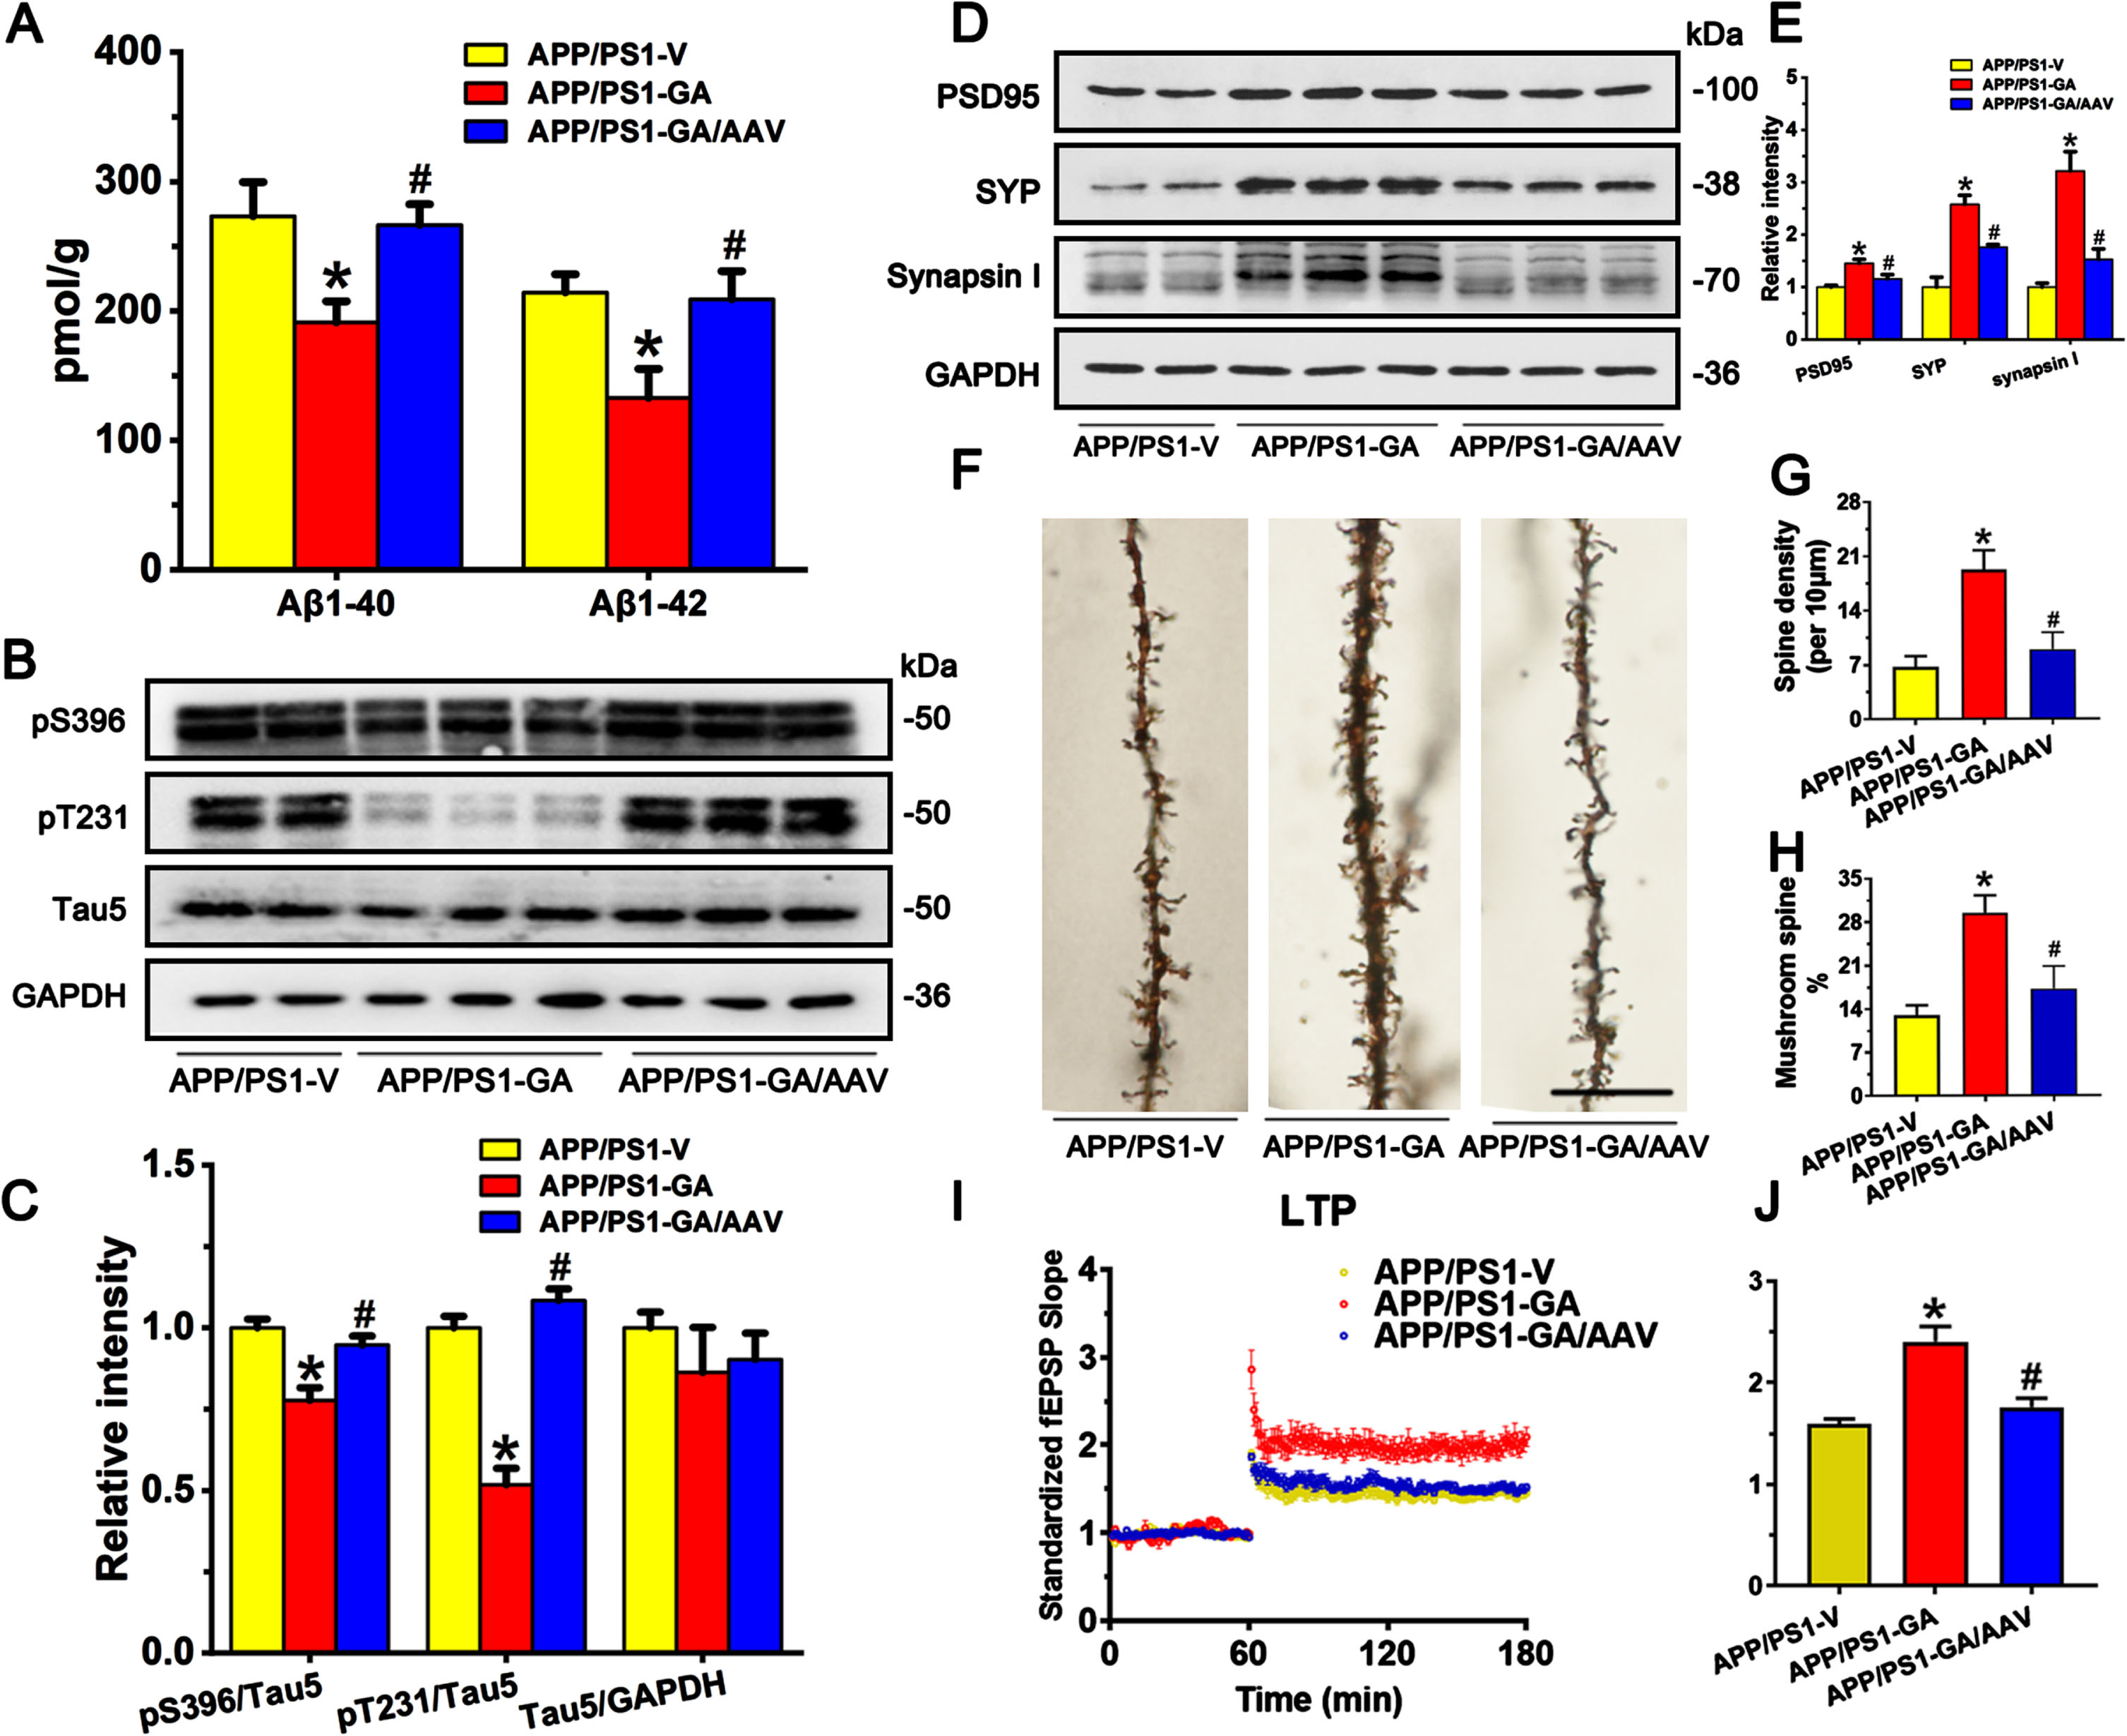 GSK-3β overexpression increases the concentration Aβ, tau phosphorylation, and impaired synaptic protein. A) The concentration of Aβ1 - 40 and Aβ1 - 42 was detected by ELISA after overexpressing GSK-3β and GA treatment in the mouse brains of APP/PS1 mice. [Aβ1-40] Two-way ANOVA, F (2, 18) = 43.435, p = 0.0123; [Aβ1-42] Two-way ANOVA, F (2, 18) = 46.342, p = 0.0108, n = 10 in each group. B, C) The phosphorylation of tau at pS396 and pT231 was assayed by western blotting in the mouse brains of APP/PS1 mice after overexpressing GSK-3β and GA administration with quantitative analysis. [pS396] Two-way ANOVA, F (2, 8) = 25.944, p = 0.0156; [pT231] Two-way ANOVA, F (2, 8) = 24.535, p = 0.0236, n = 5 in each group. D, E) The protein levels of synapse were assayed by western blotting in the mouse brains of APP/PS1 mice with quantitative analysis. [PSD95] Two-way ANOVA, F (2, 8) = 32.255, p = 0.0108; [SYP] Two-way ANOVA, F (2, 8) = 26.435, p = 0.0208, [Synapsin I] Two-way ANOVA, F (2, 8) = 32.542, p = 0.0194, n = 5 in each group. F-H) The spine number and shape were examined by Golgi-cox staining in the mouse brains of APP/PS1 mice, with quantitative analysis. Two-way ANOVA, F (2, 8) = 29.4235, p = 0.0324, n = 5 in each group. I, J) Synaptic plasticity was detected in brain slices of APP/PS1 mice. Two-way ANOVA, F (2, 8) = 19.432, p = 0.0321, n = 5 in each group. *p < 0.05 versus APP/PS1-V, #p < 0.05 versus APP/PS1-GA. Data are presented as mean±SD.